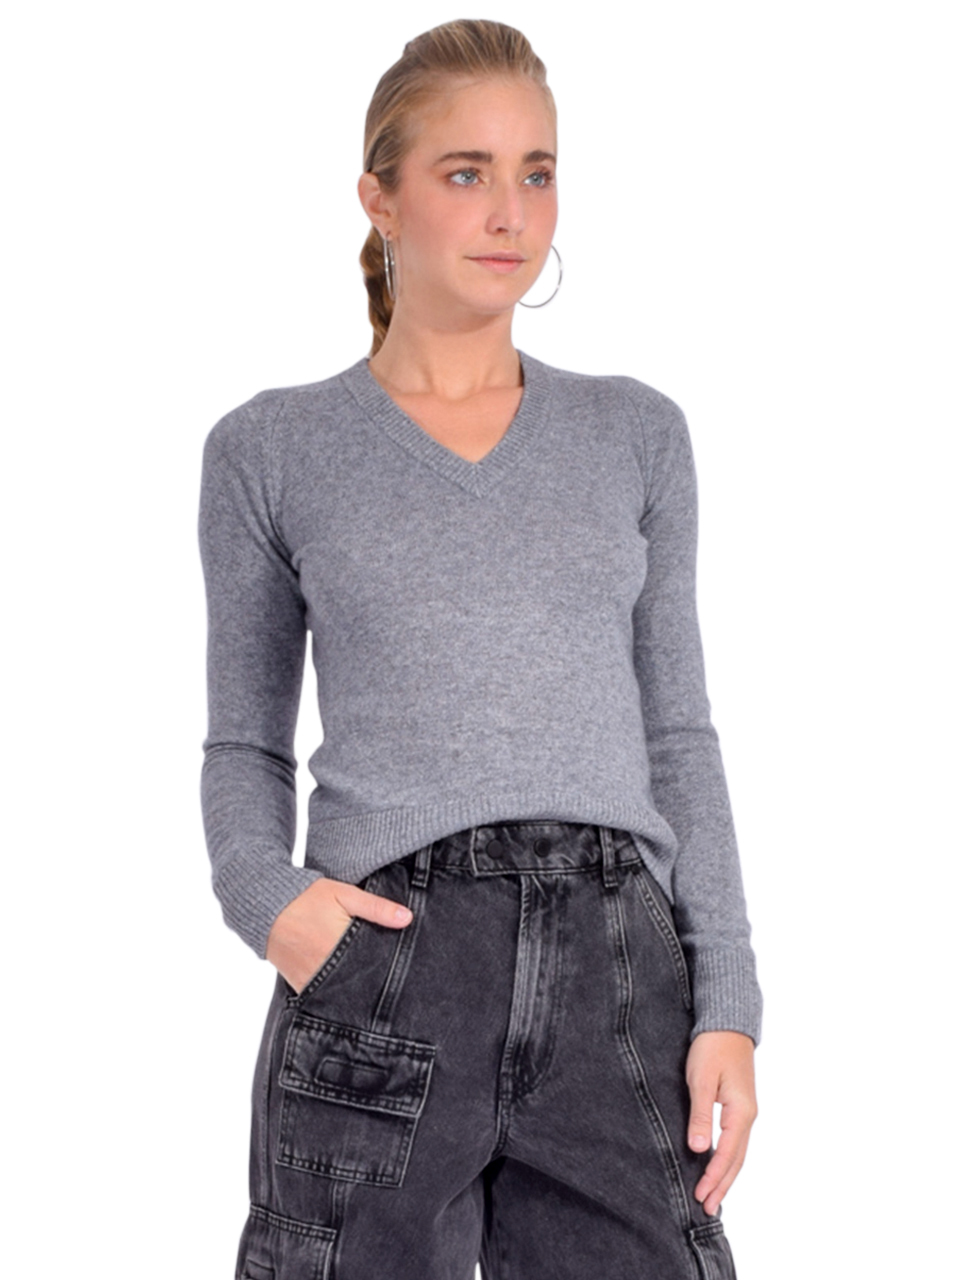 MINNIE ROSE Cashmere V-Neck Raglan Pullover in Gray Side View 